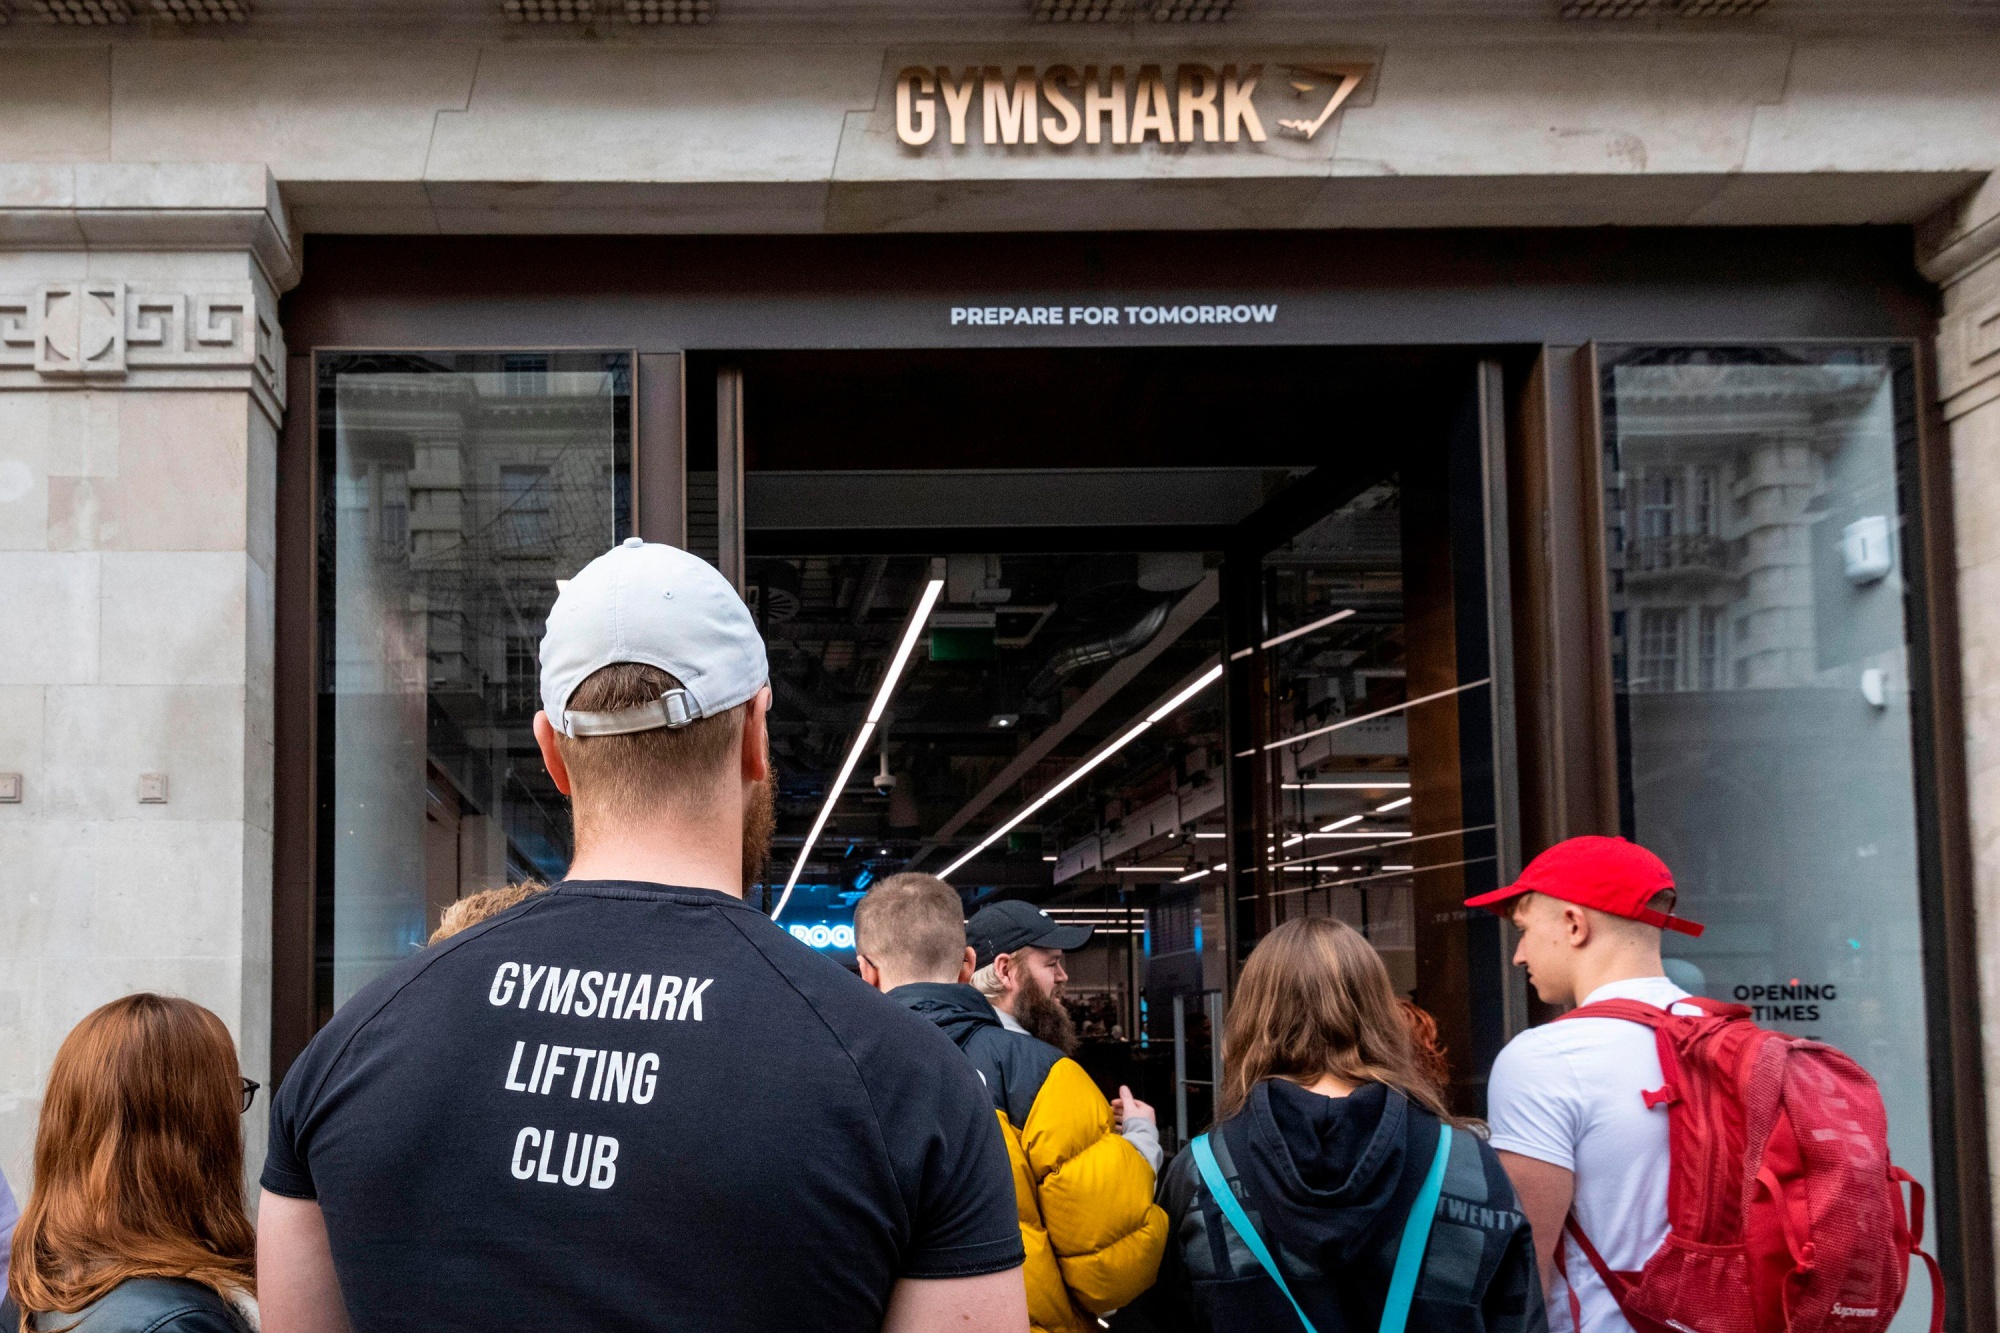 Gymshark named Britain's fastest-growing fashion brand